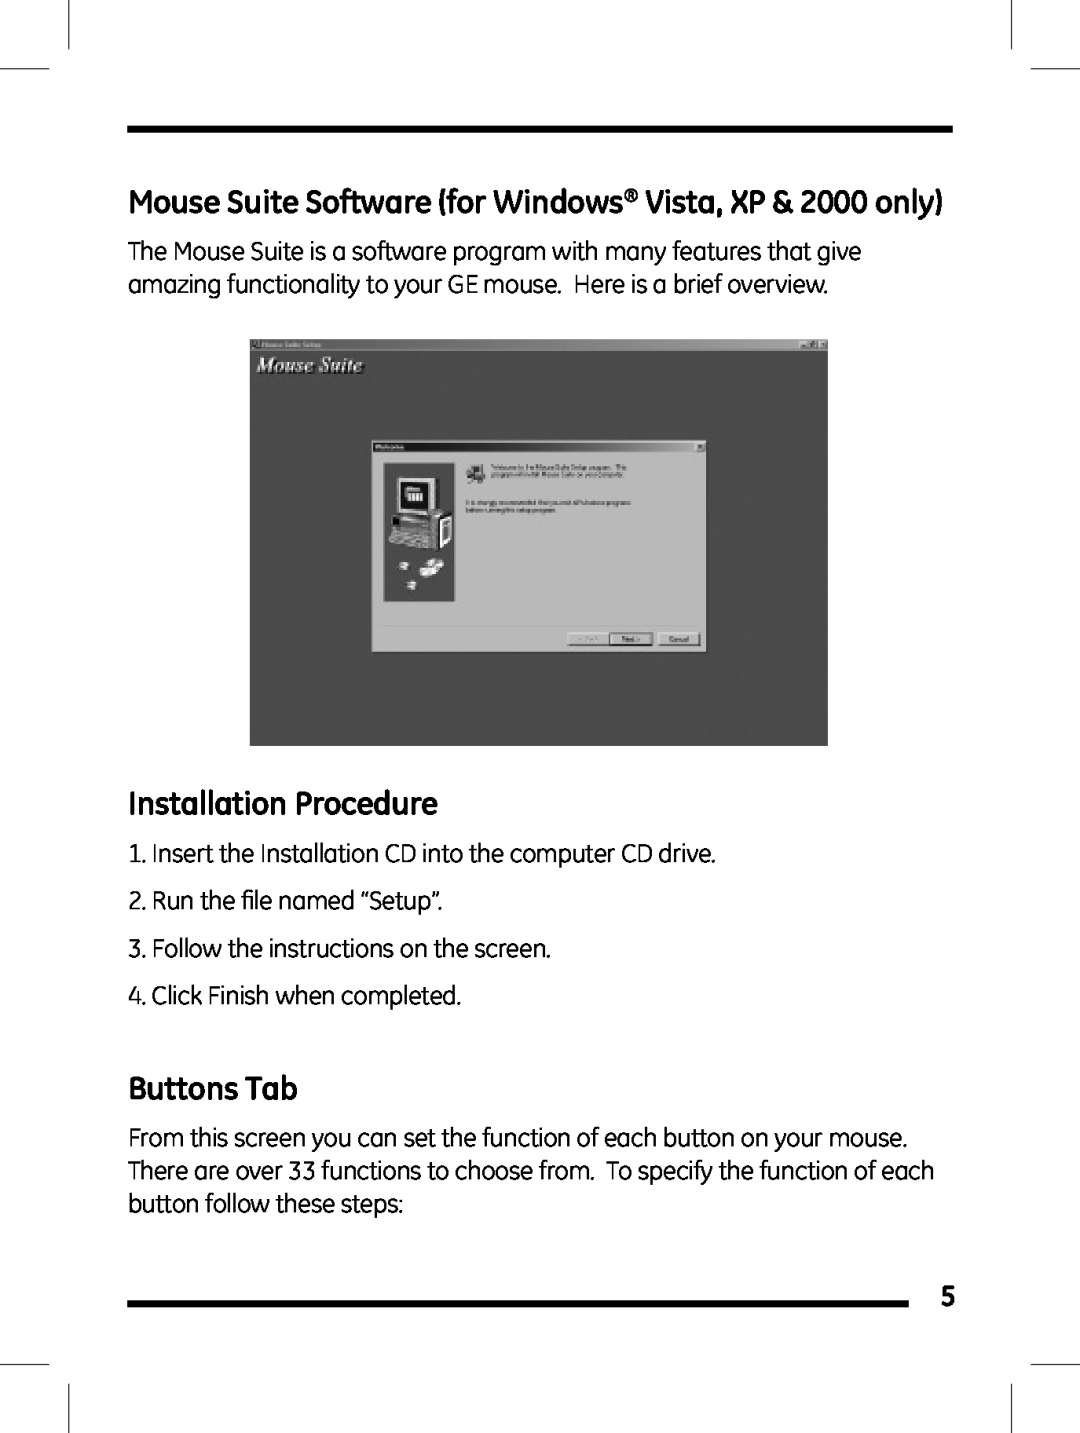 GE 98504 instruction manual Mouse Suite Software for Windows Vista, XP & 2000 only, Installation Procedure, Buttons Tab 